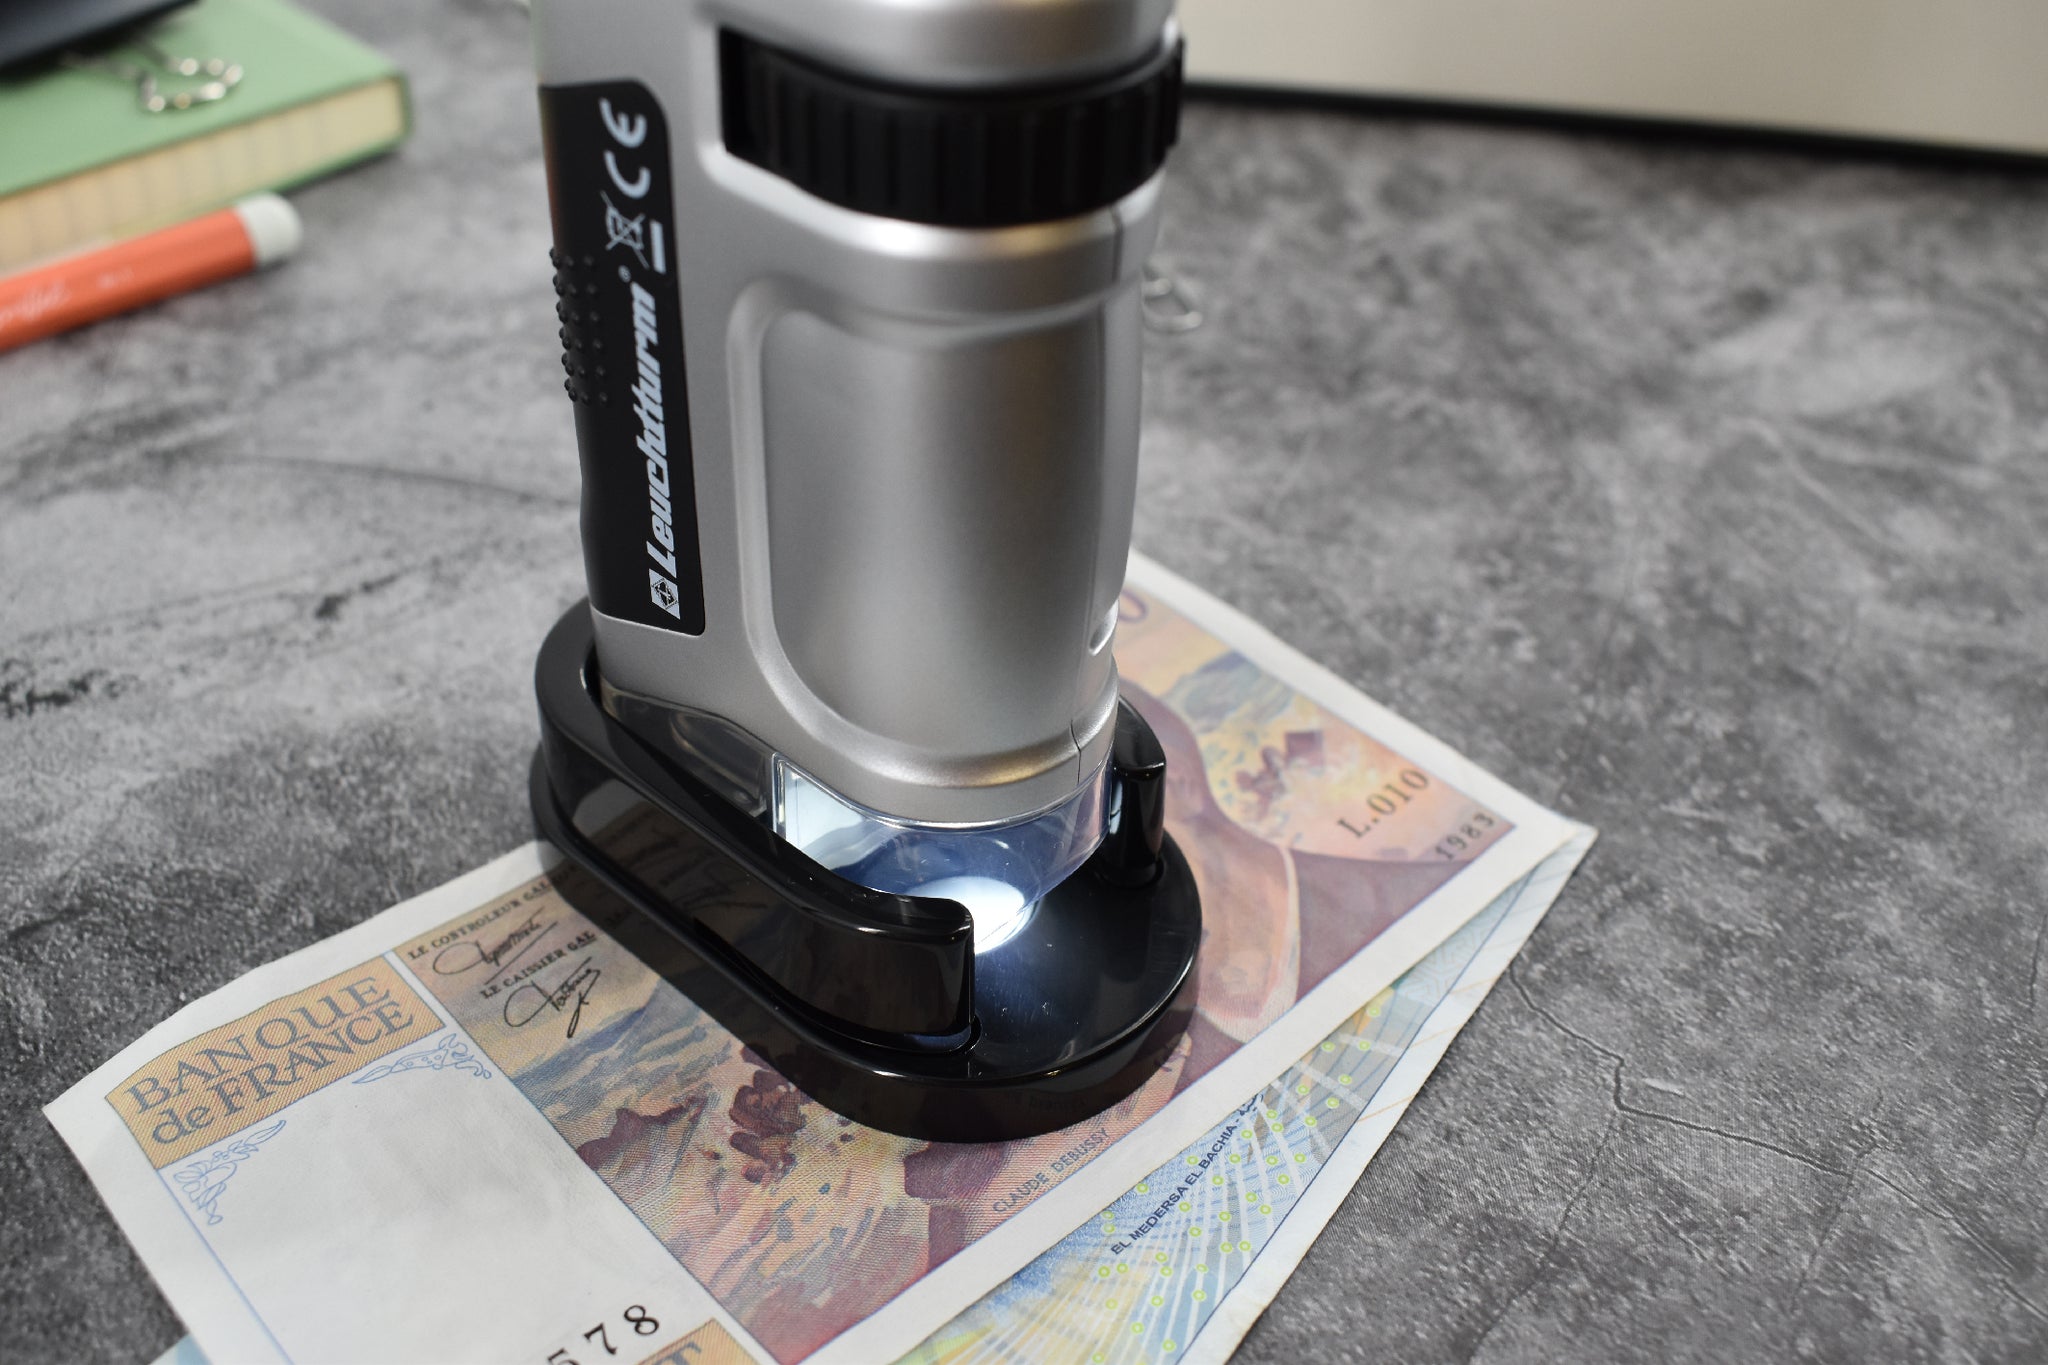 Pocket Microscope, 20x magnification at